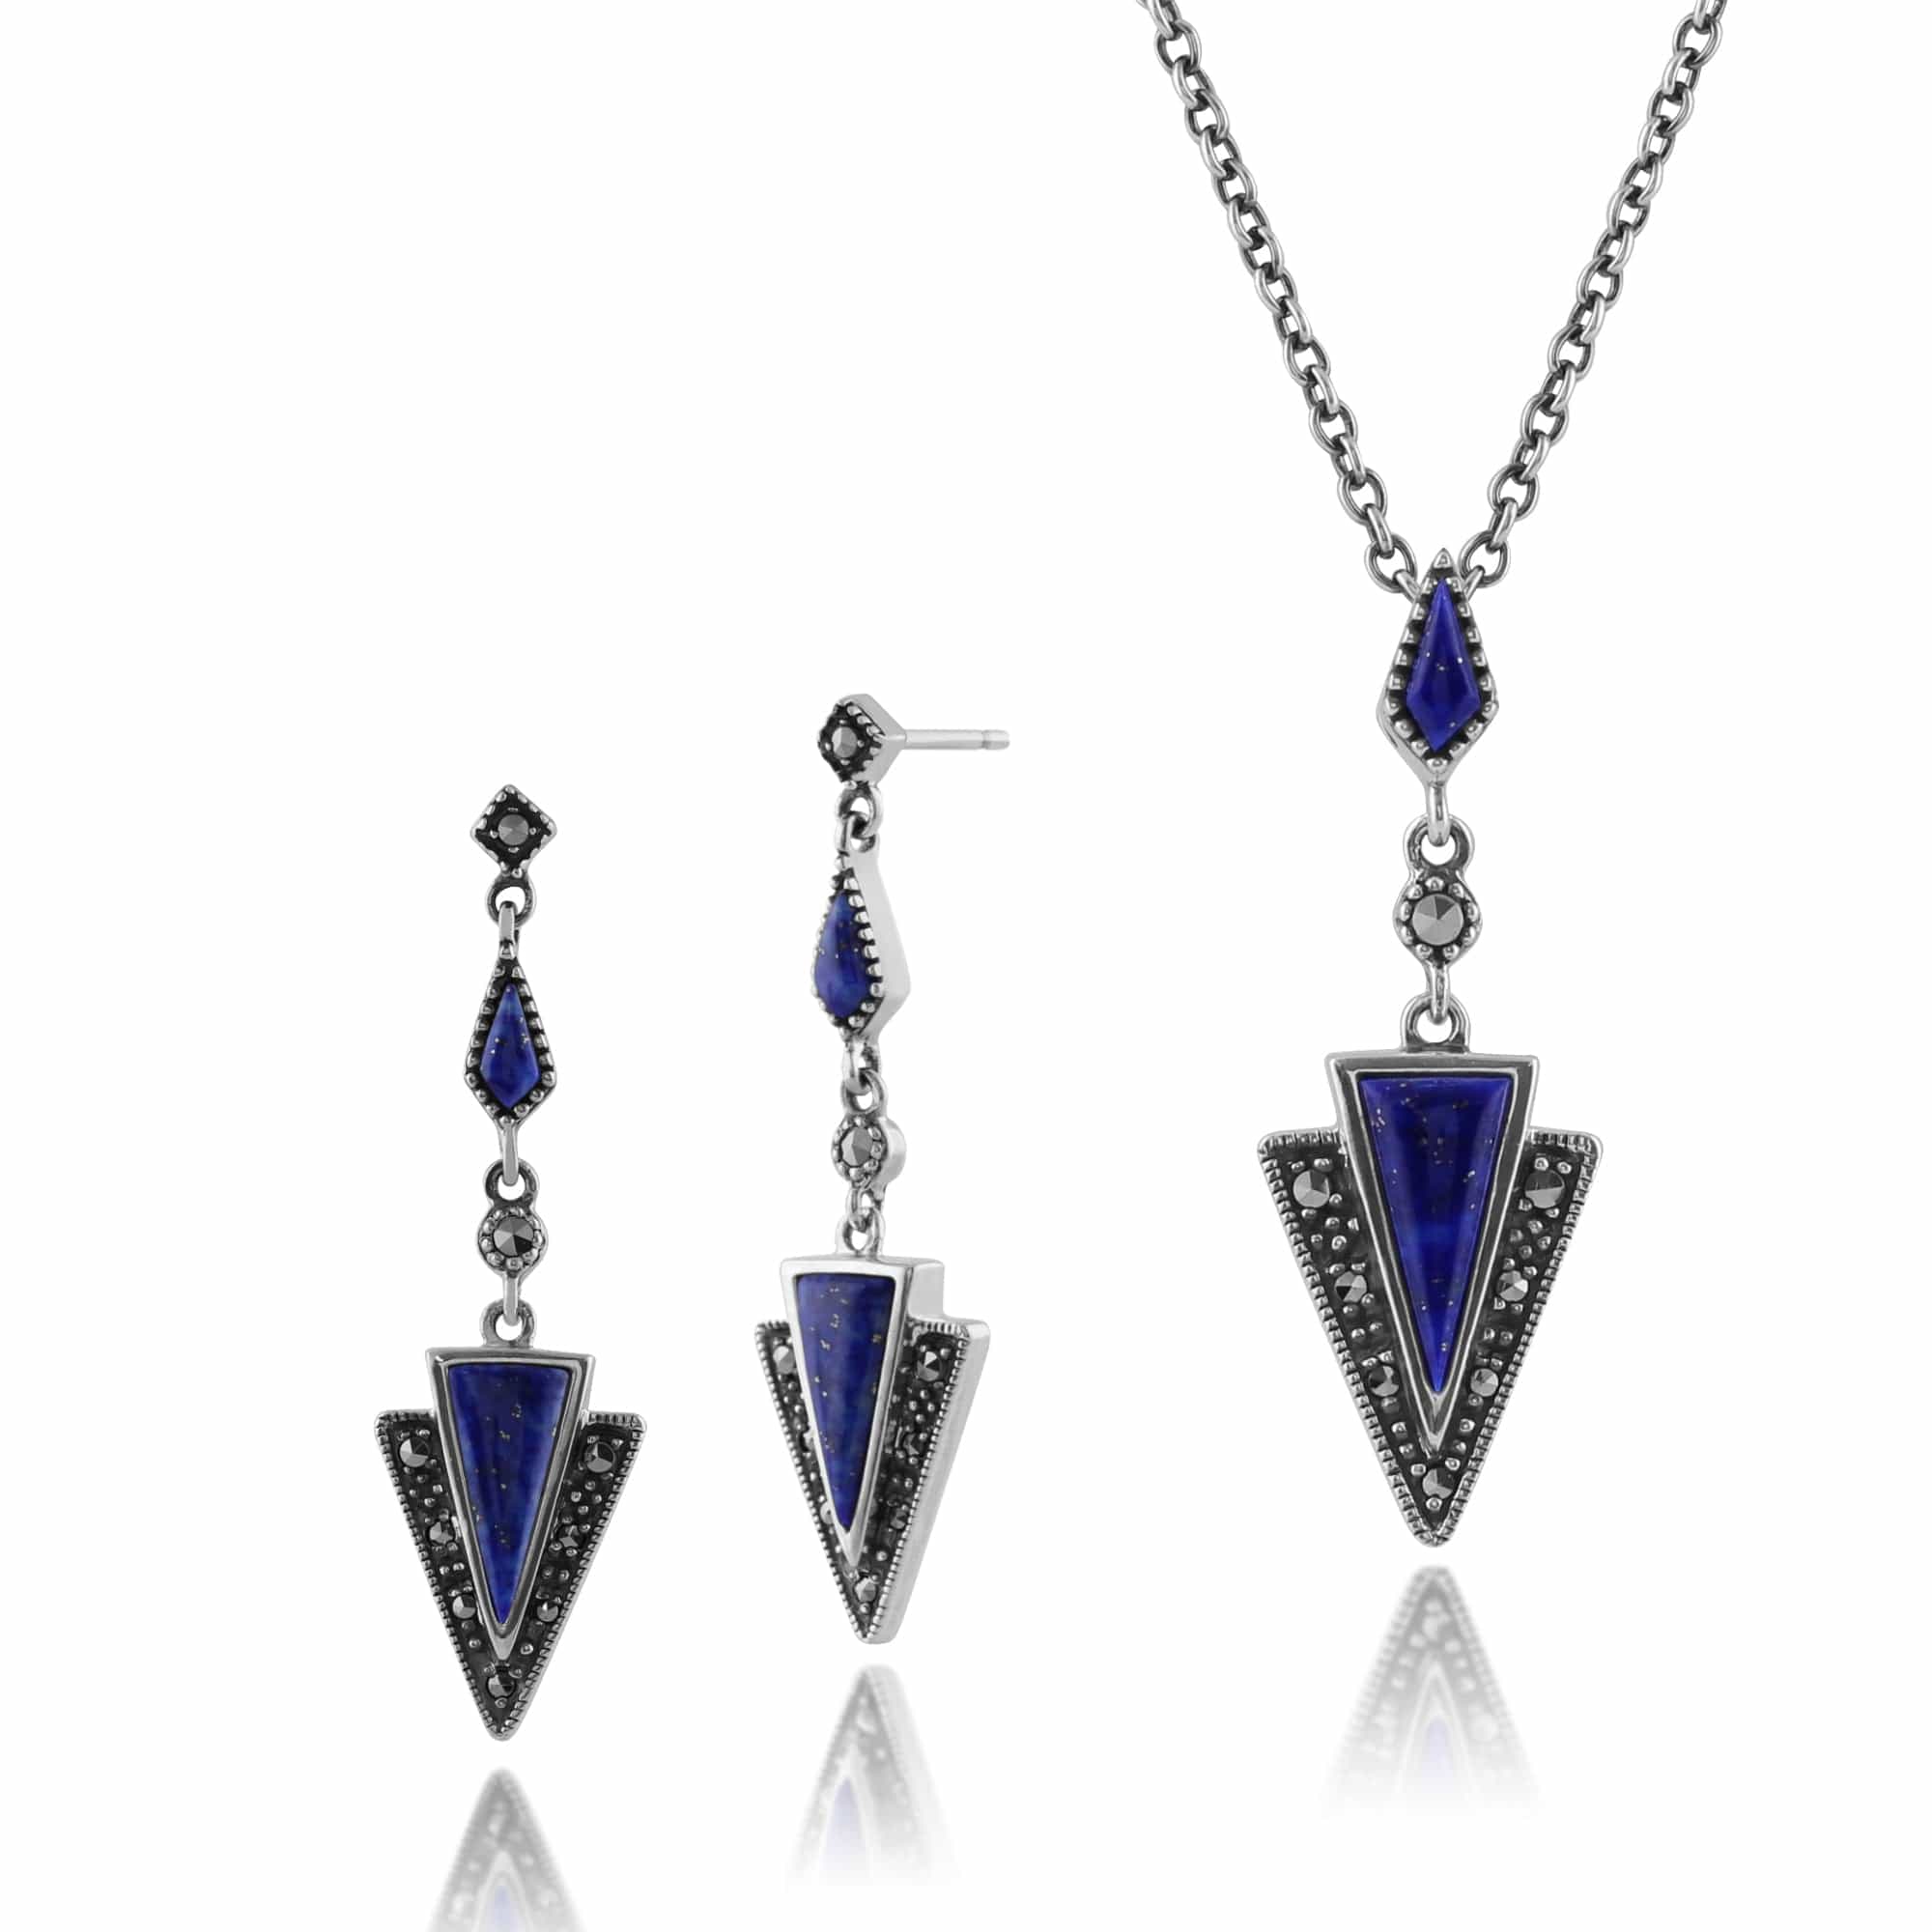 214E823002925-214N658303925 Art Deco Style Style Triangle Lapis Lazuli & Marcasite Drop Earrings & Necklace Set in 925 Sterling Silver 1